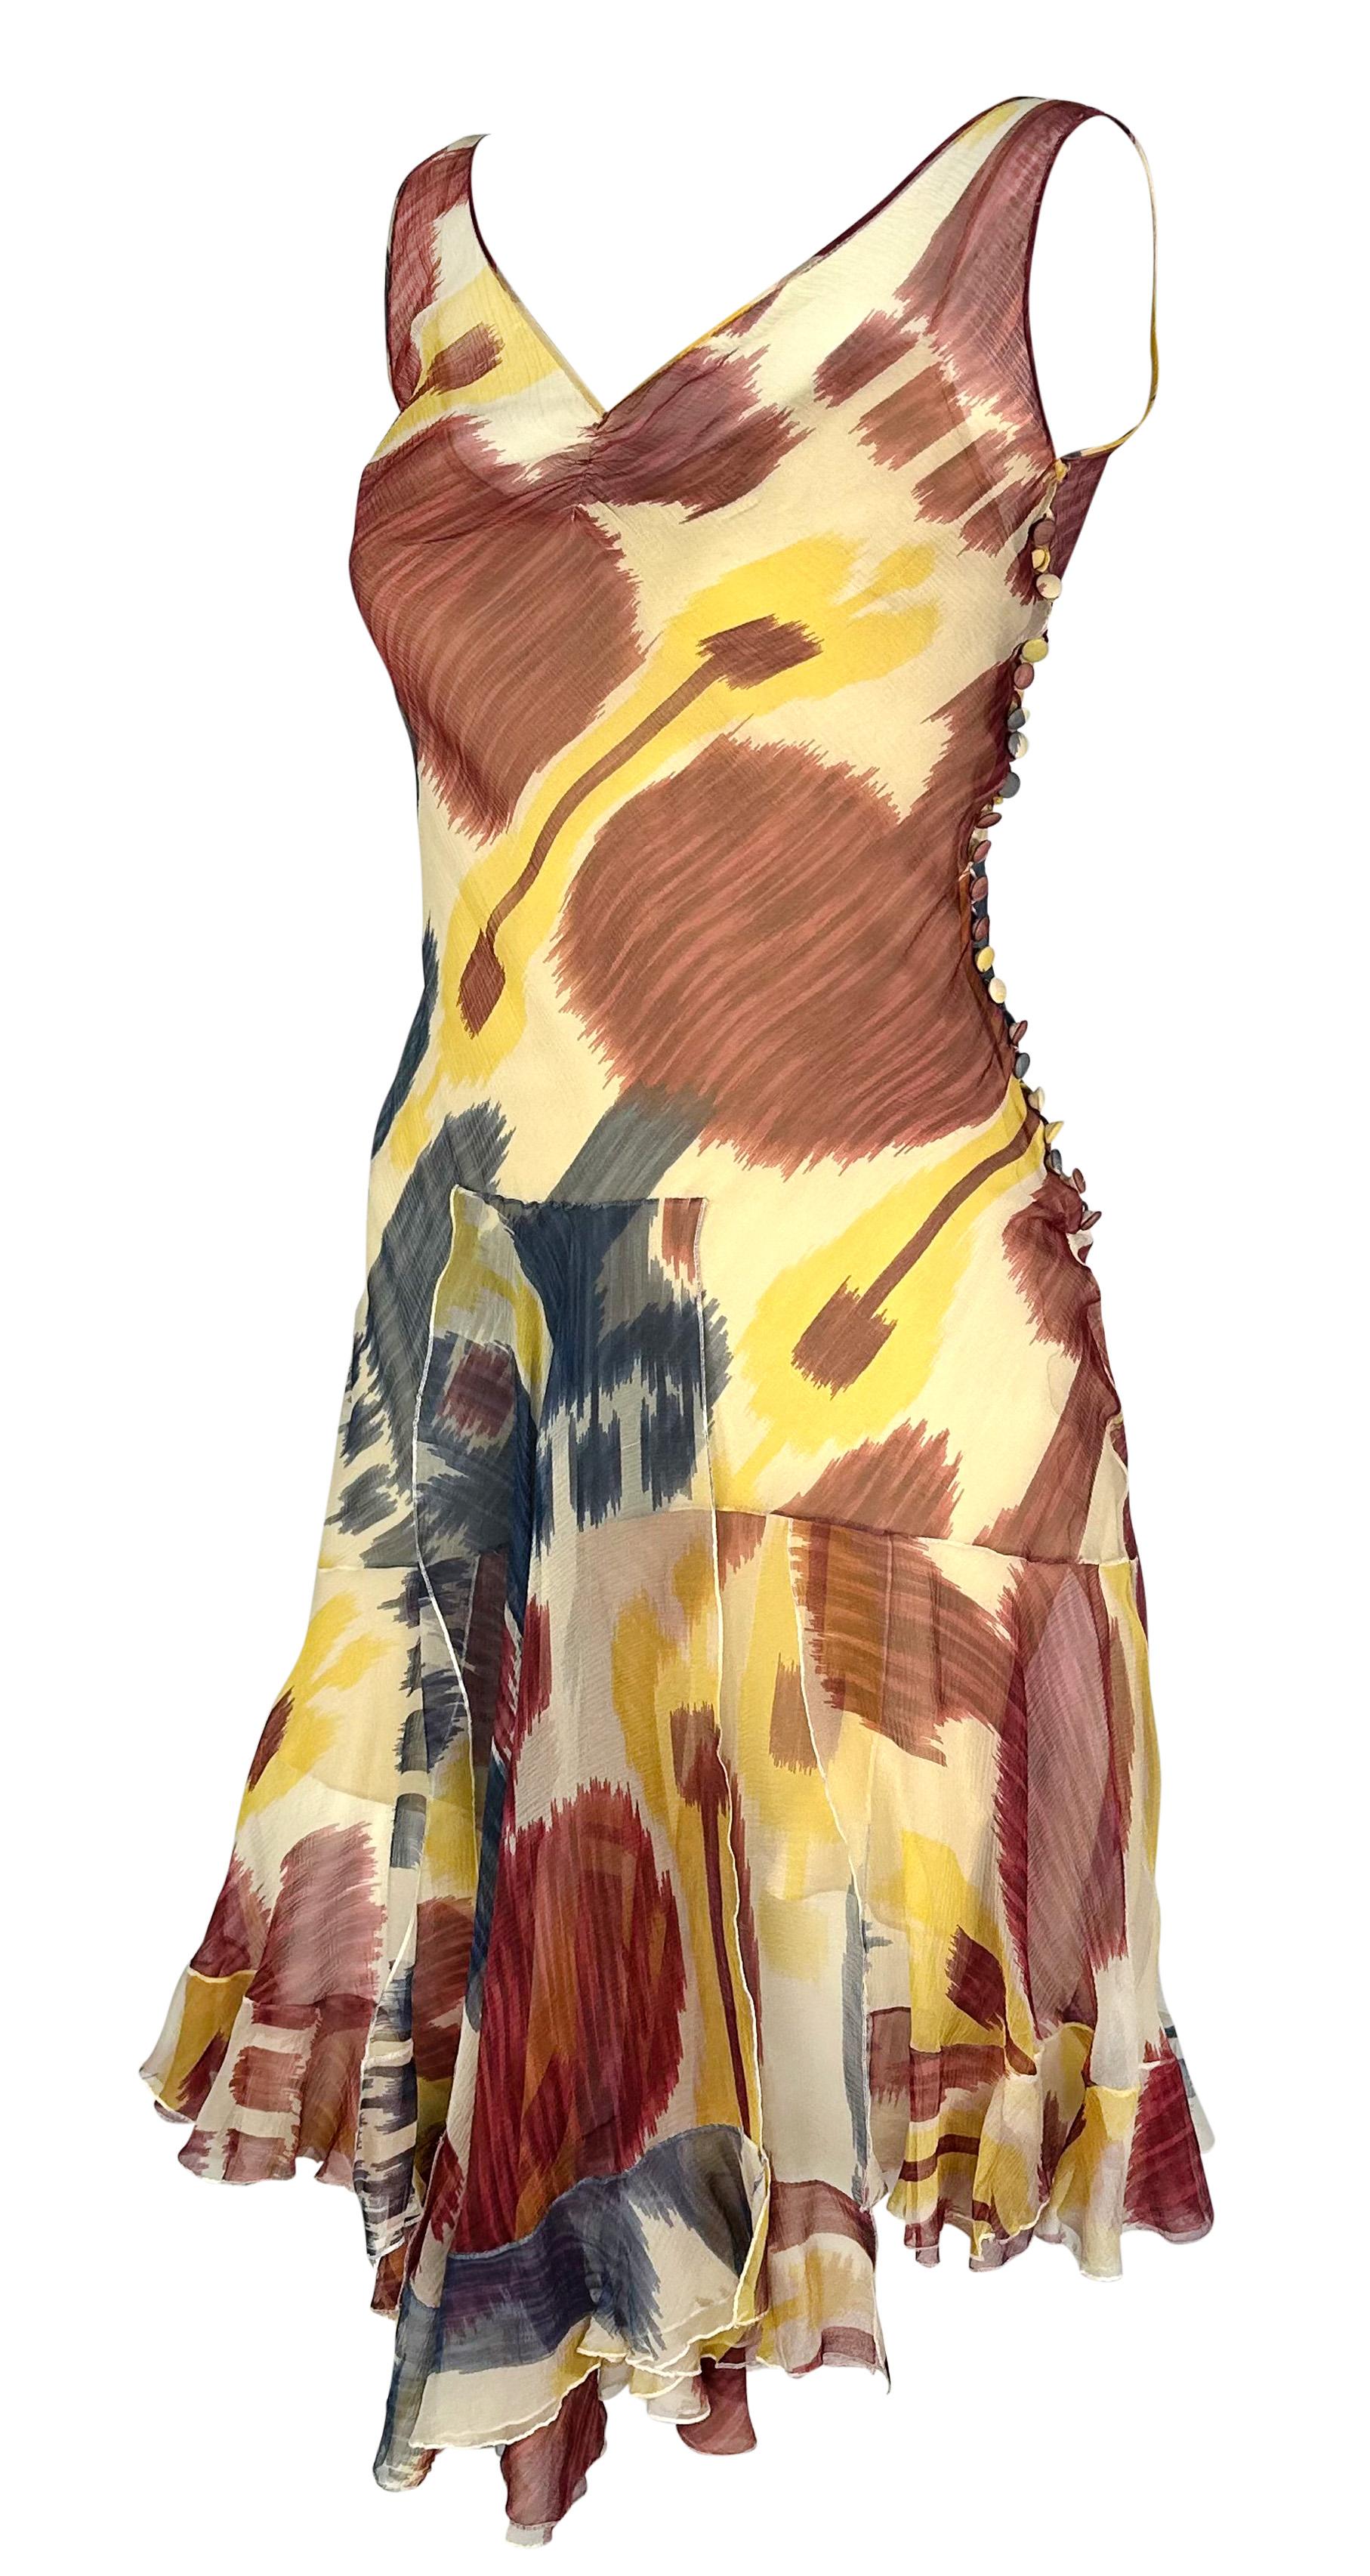 John Galliano designed this whimsical red ikat motif mini dress for Christian Dior's Fall/Winter 2001 collection. This sleeveless silk mini dress is covered in a bold multicolor Ikat print, which Galliano used in the Spring/Summer 1998 collection of